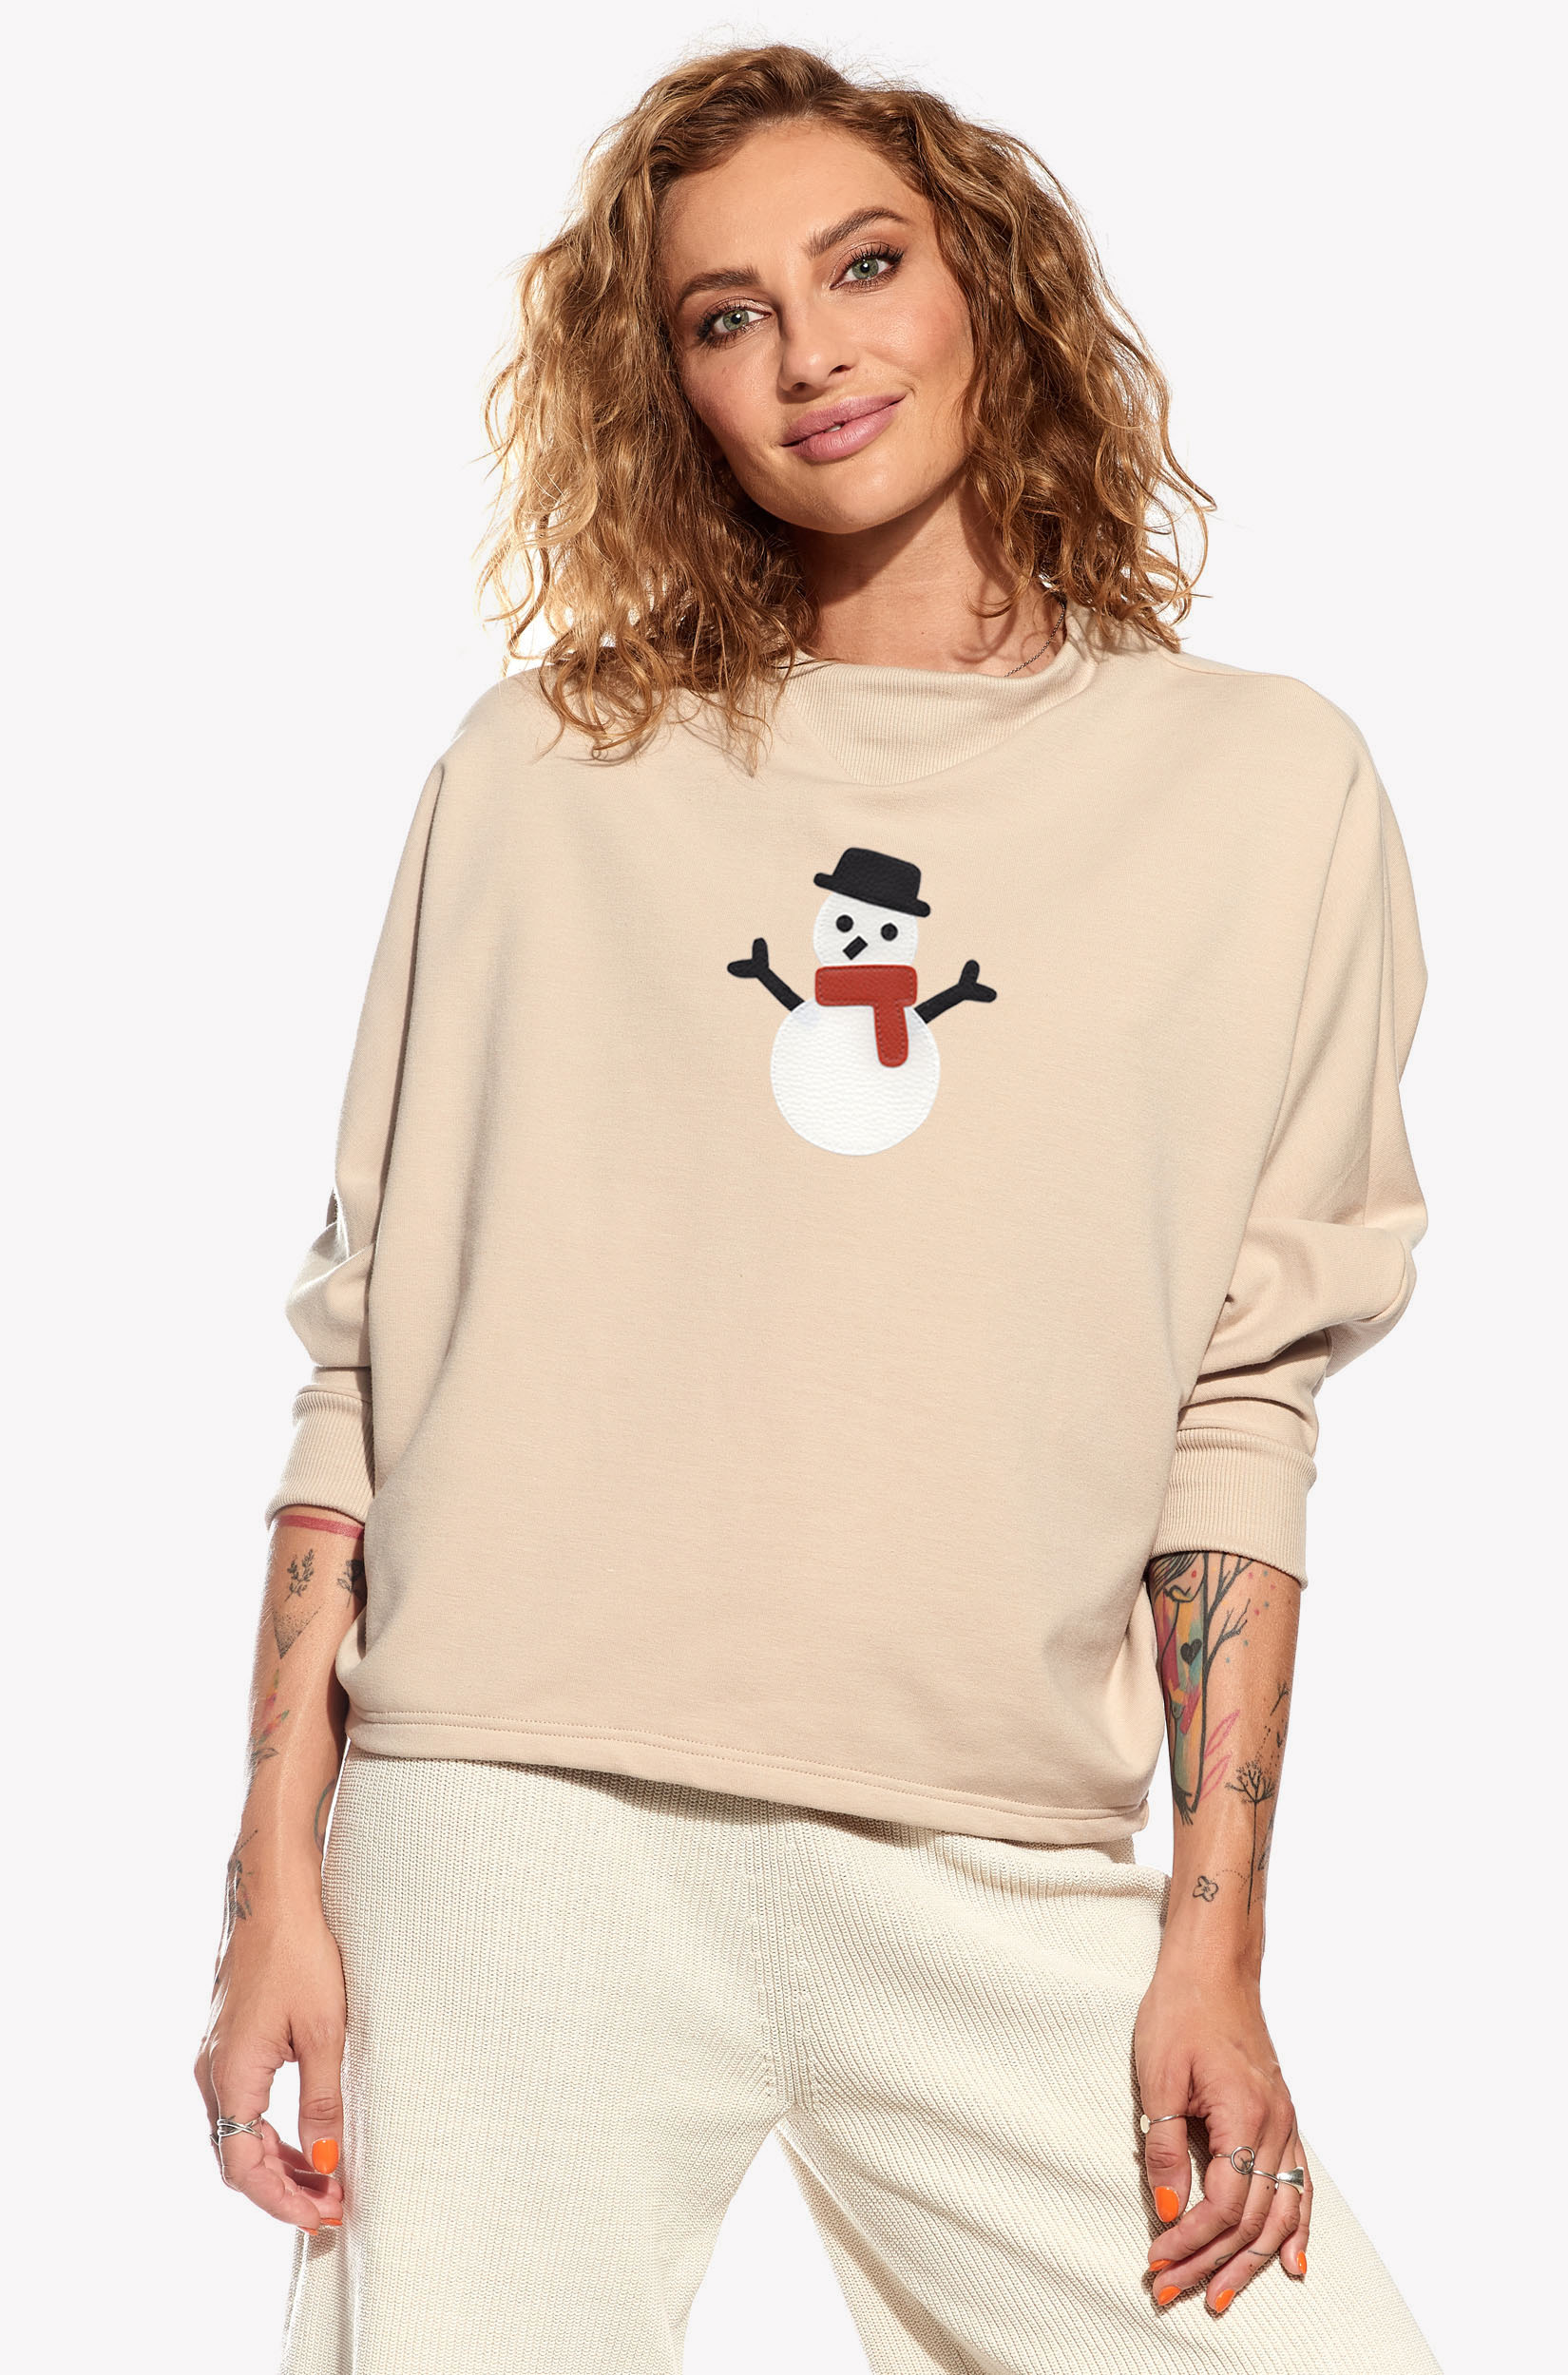 Hoodie with a snowman